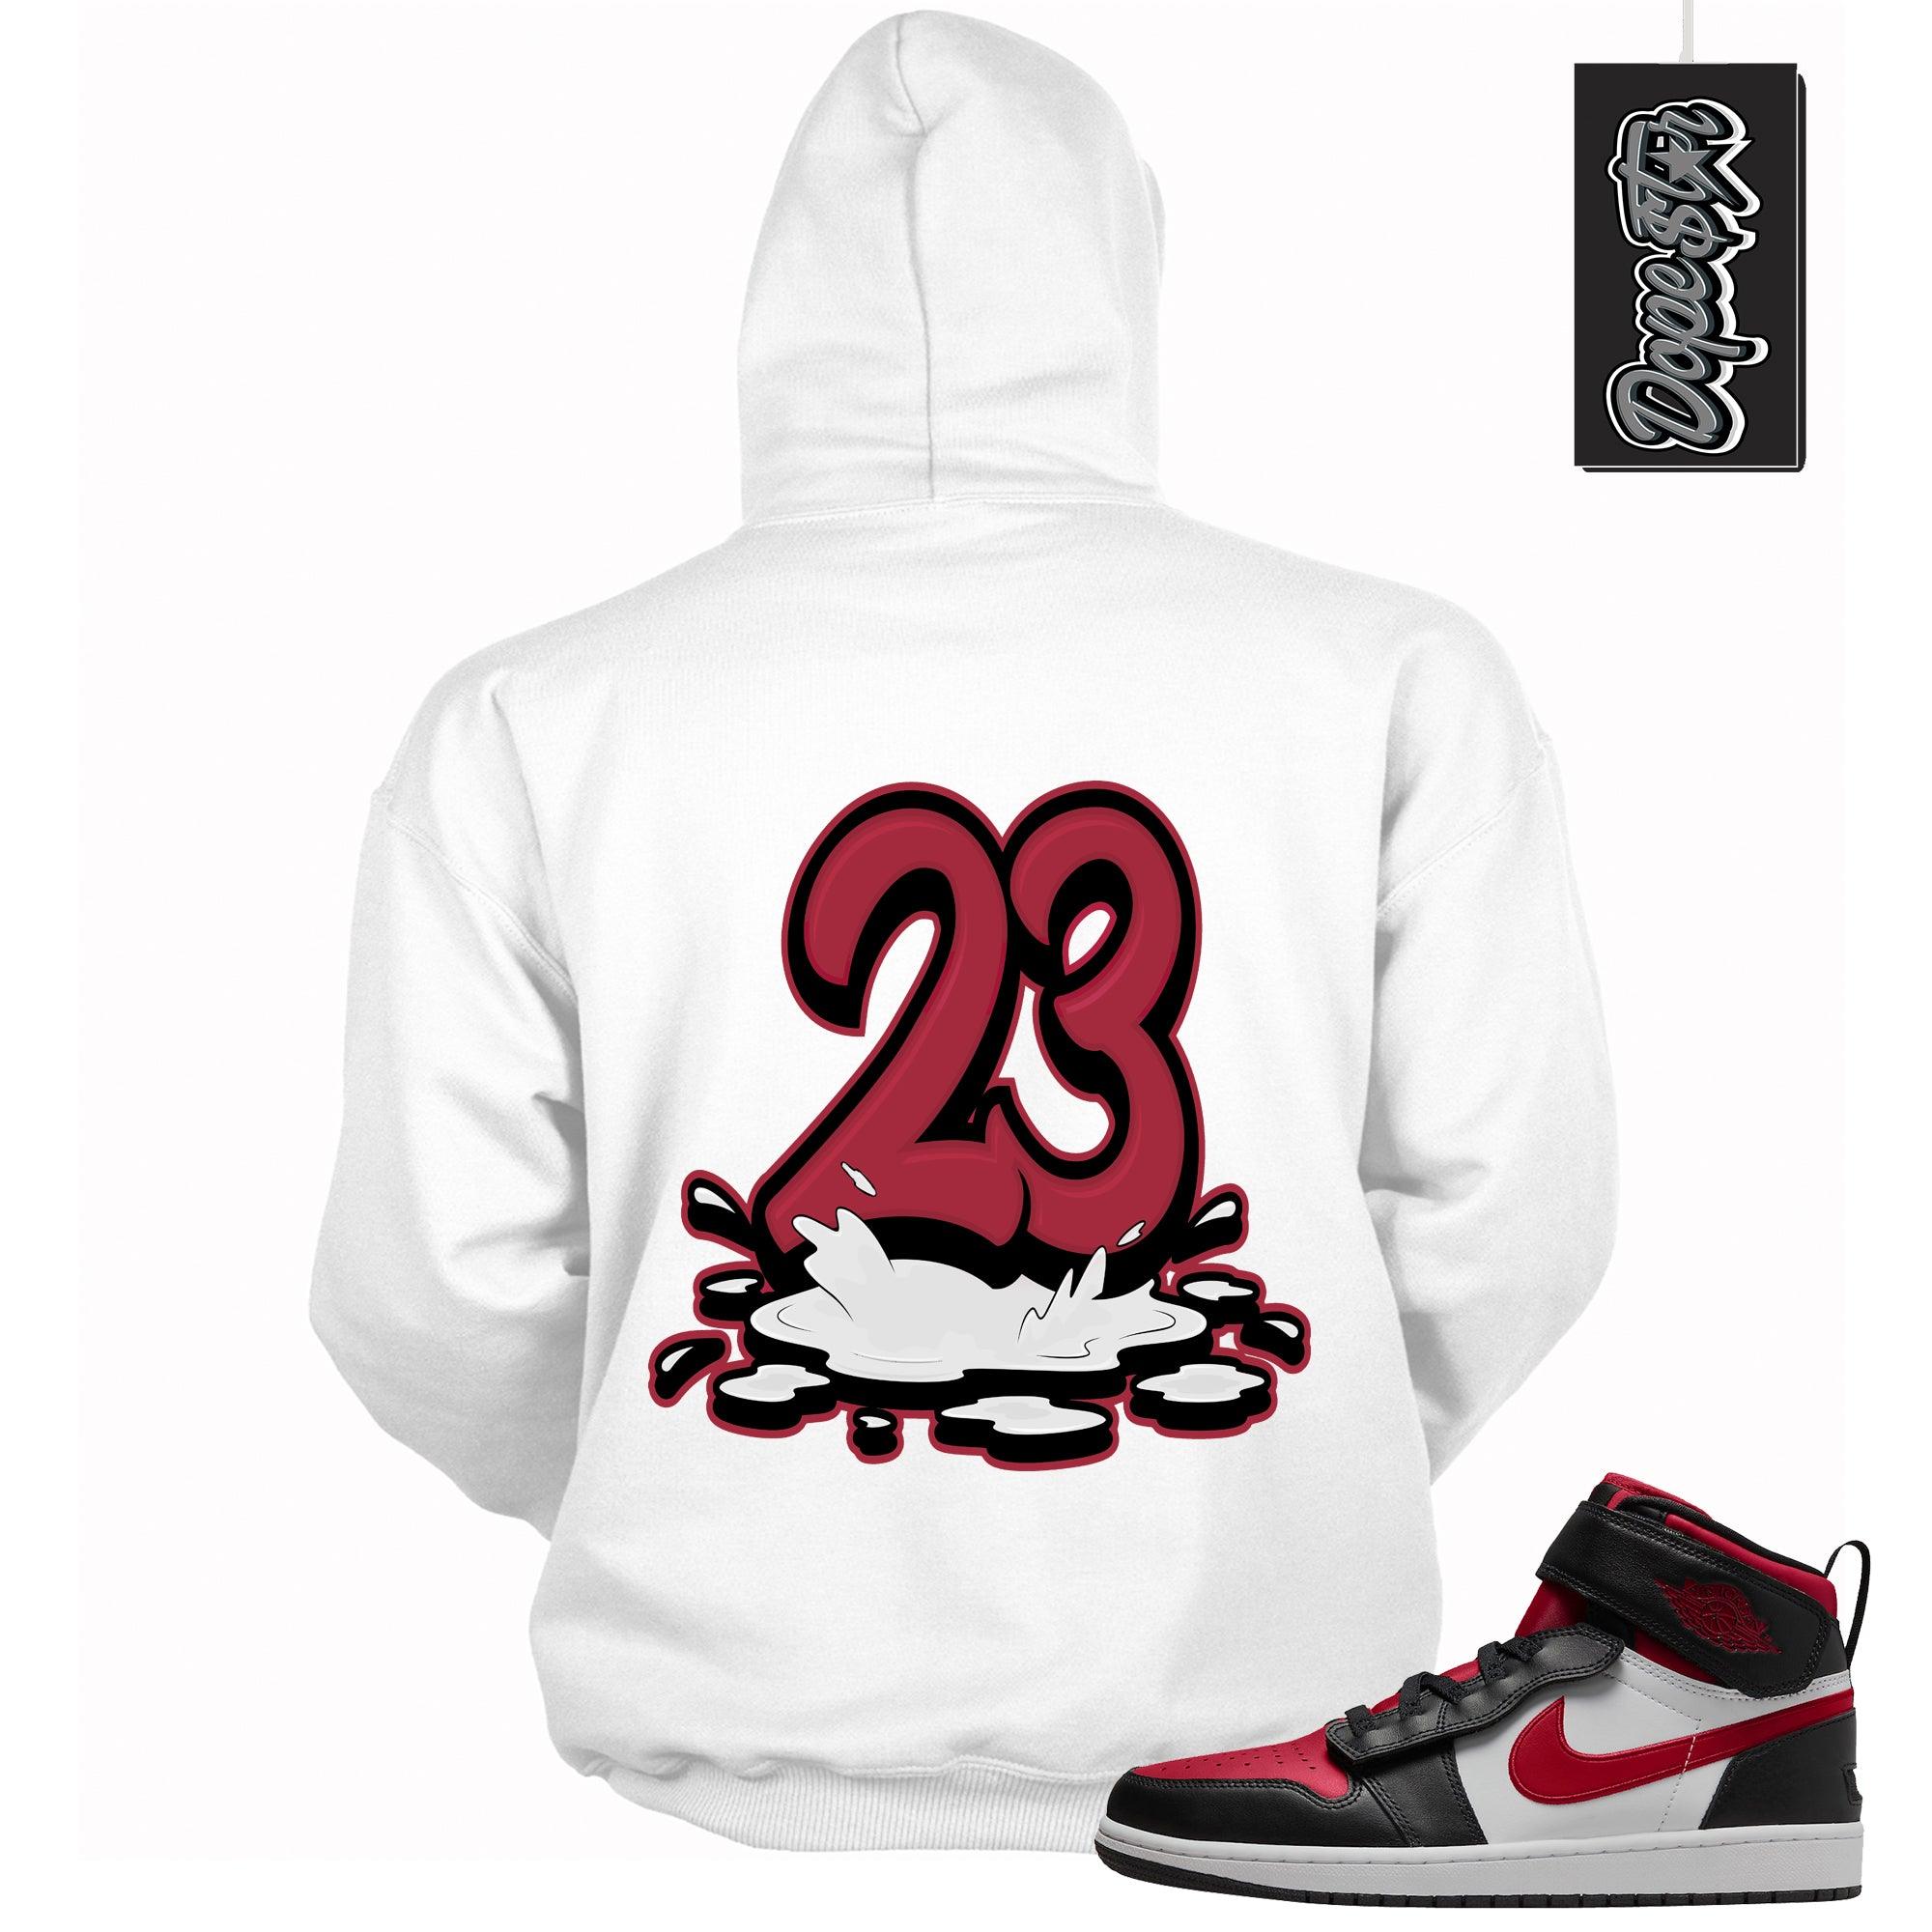 Number 23 Melting Hoodie AJ 1 High FlyEase Black White Fire Red photo